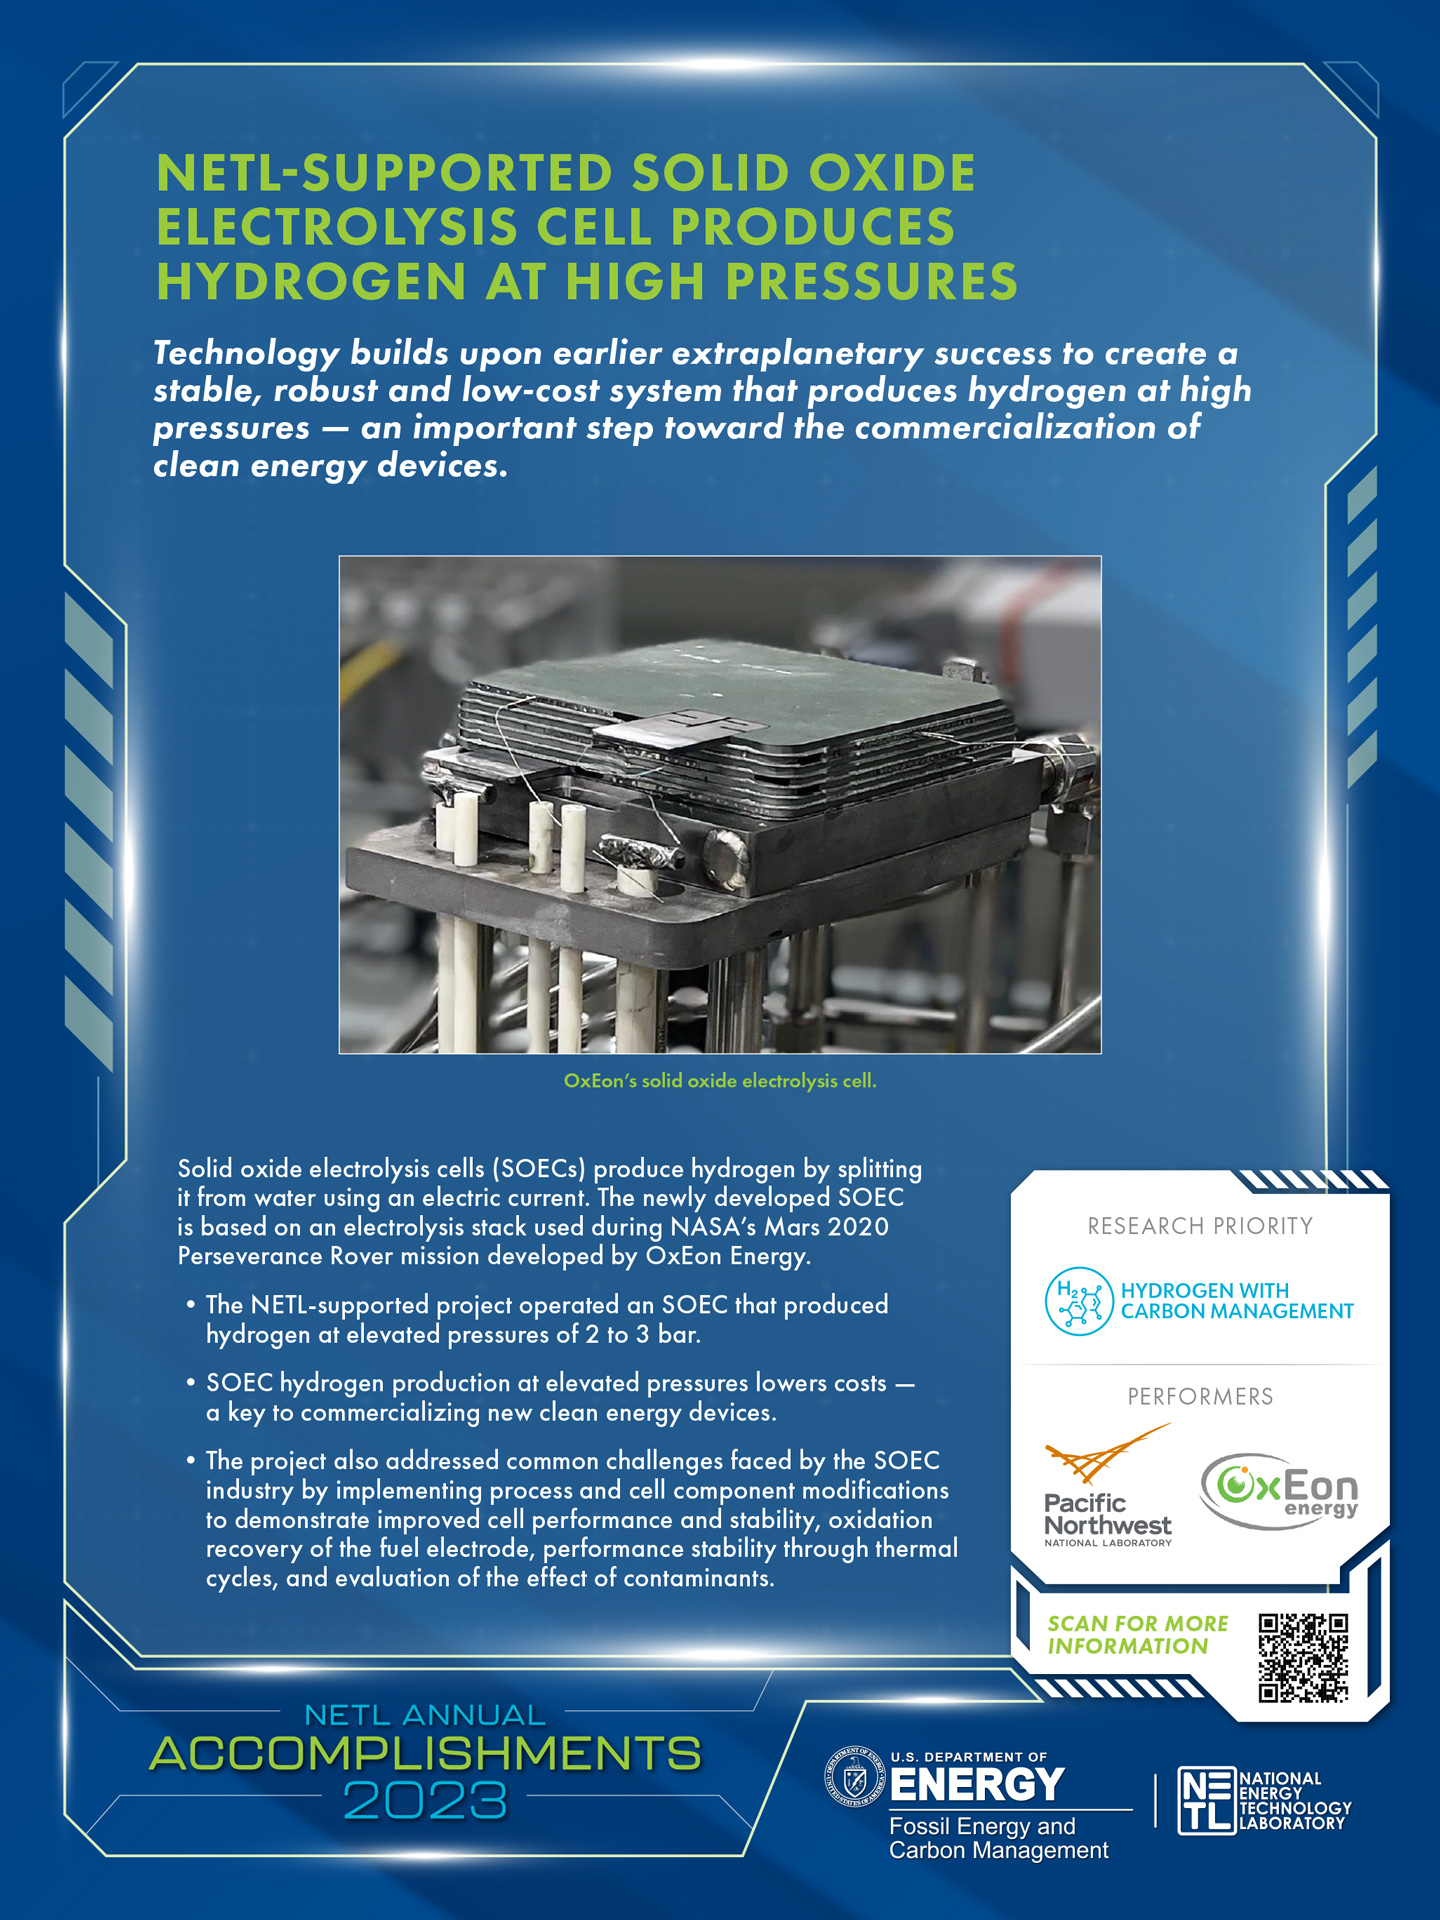 NETL-Supported Solid Oxide Electrolysis Cell Produces Hydrogen at High Pressures